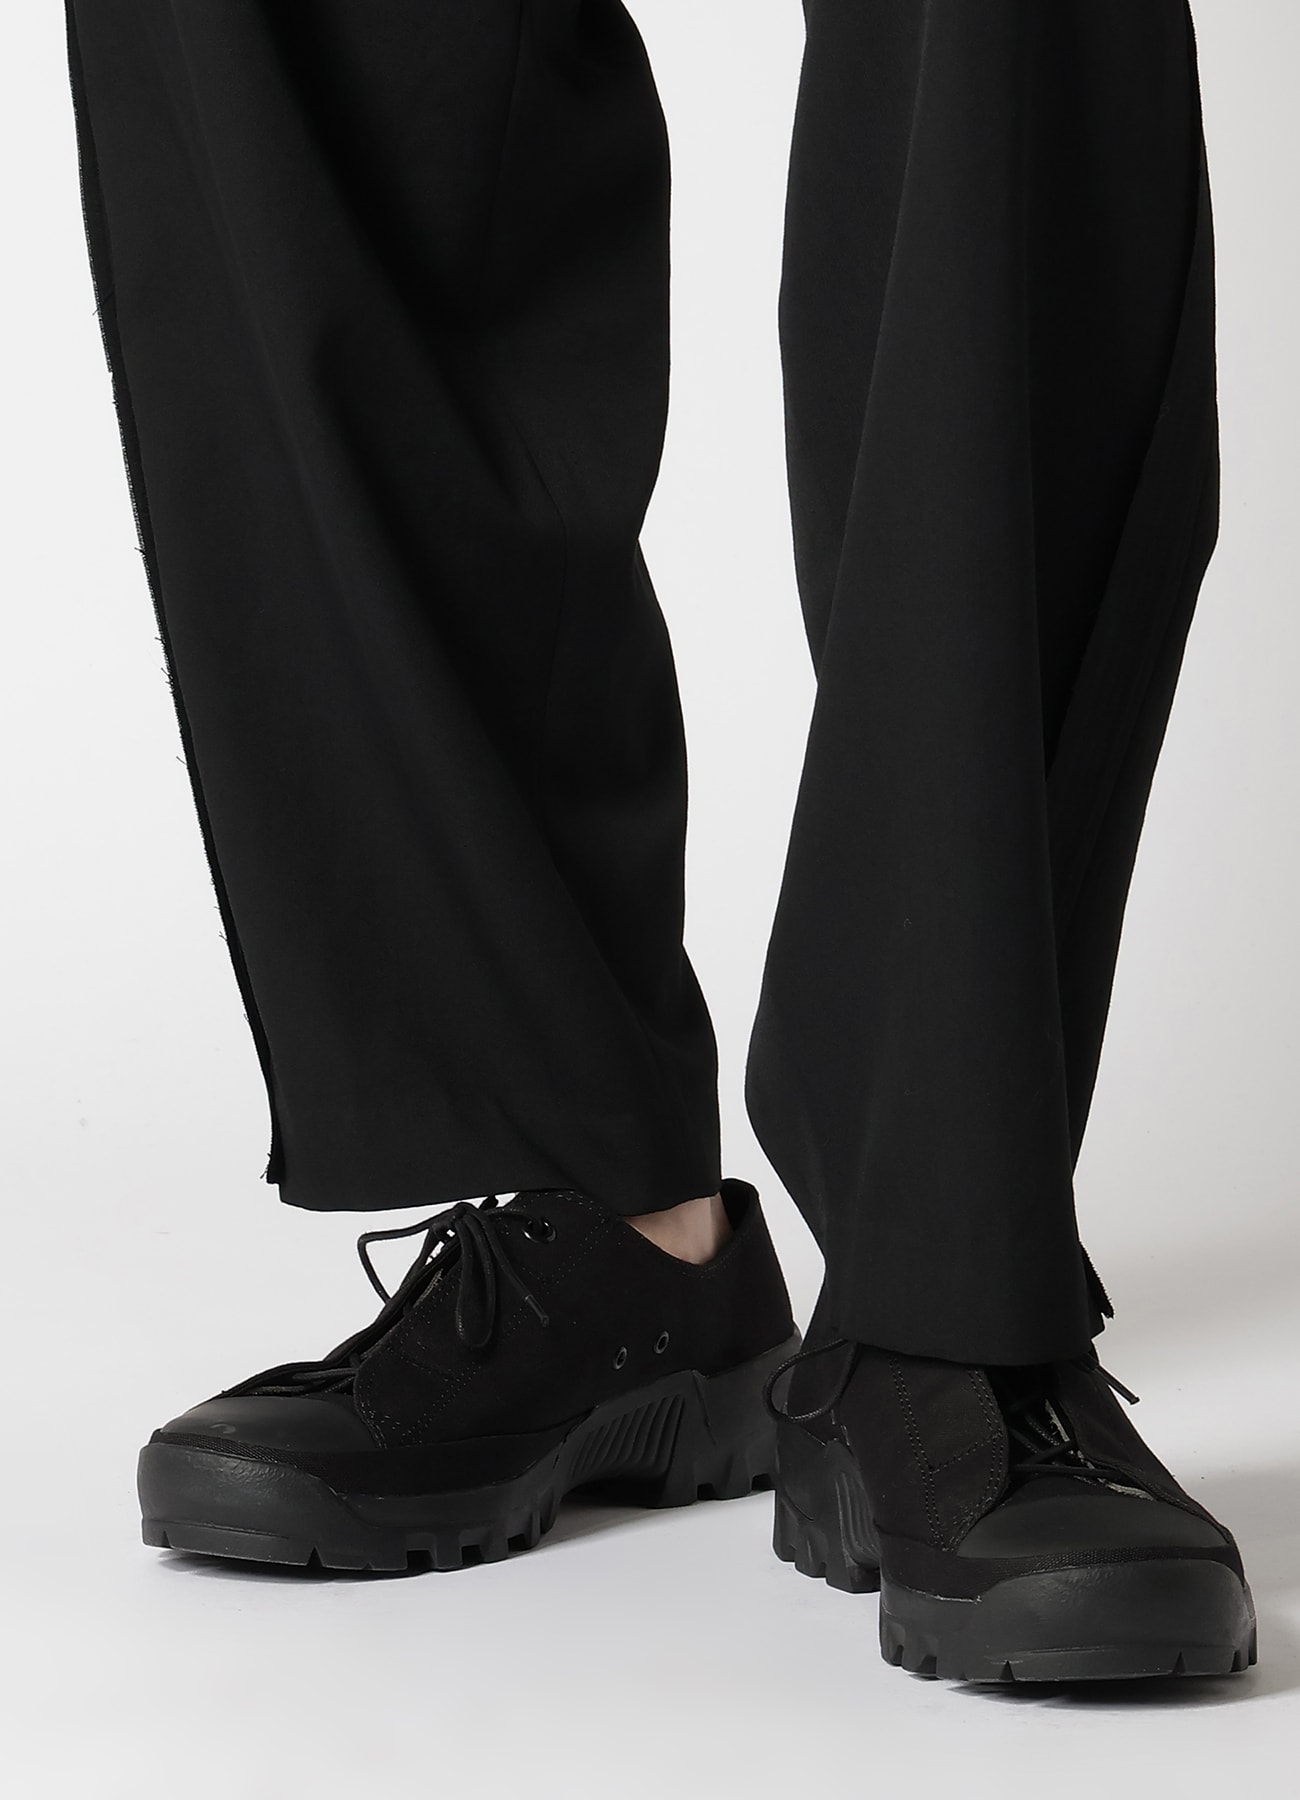 WOOL GABARDINE PANTS WITH DECORATIVE CLOTH(S Black): Y's for men 